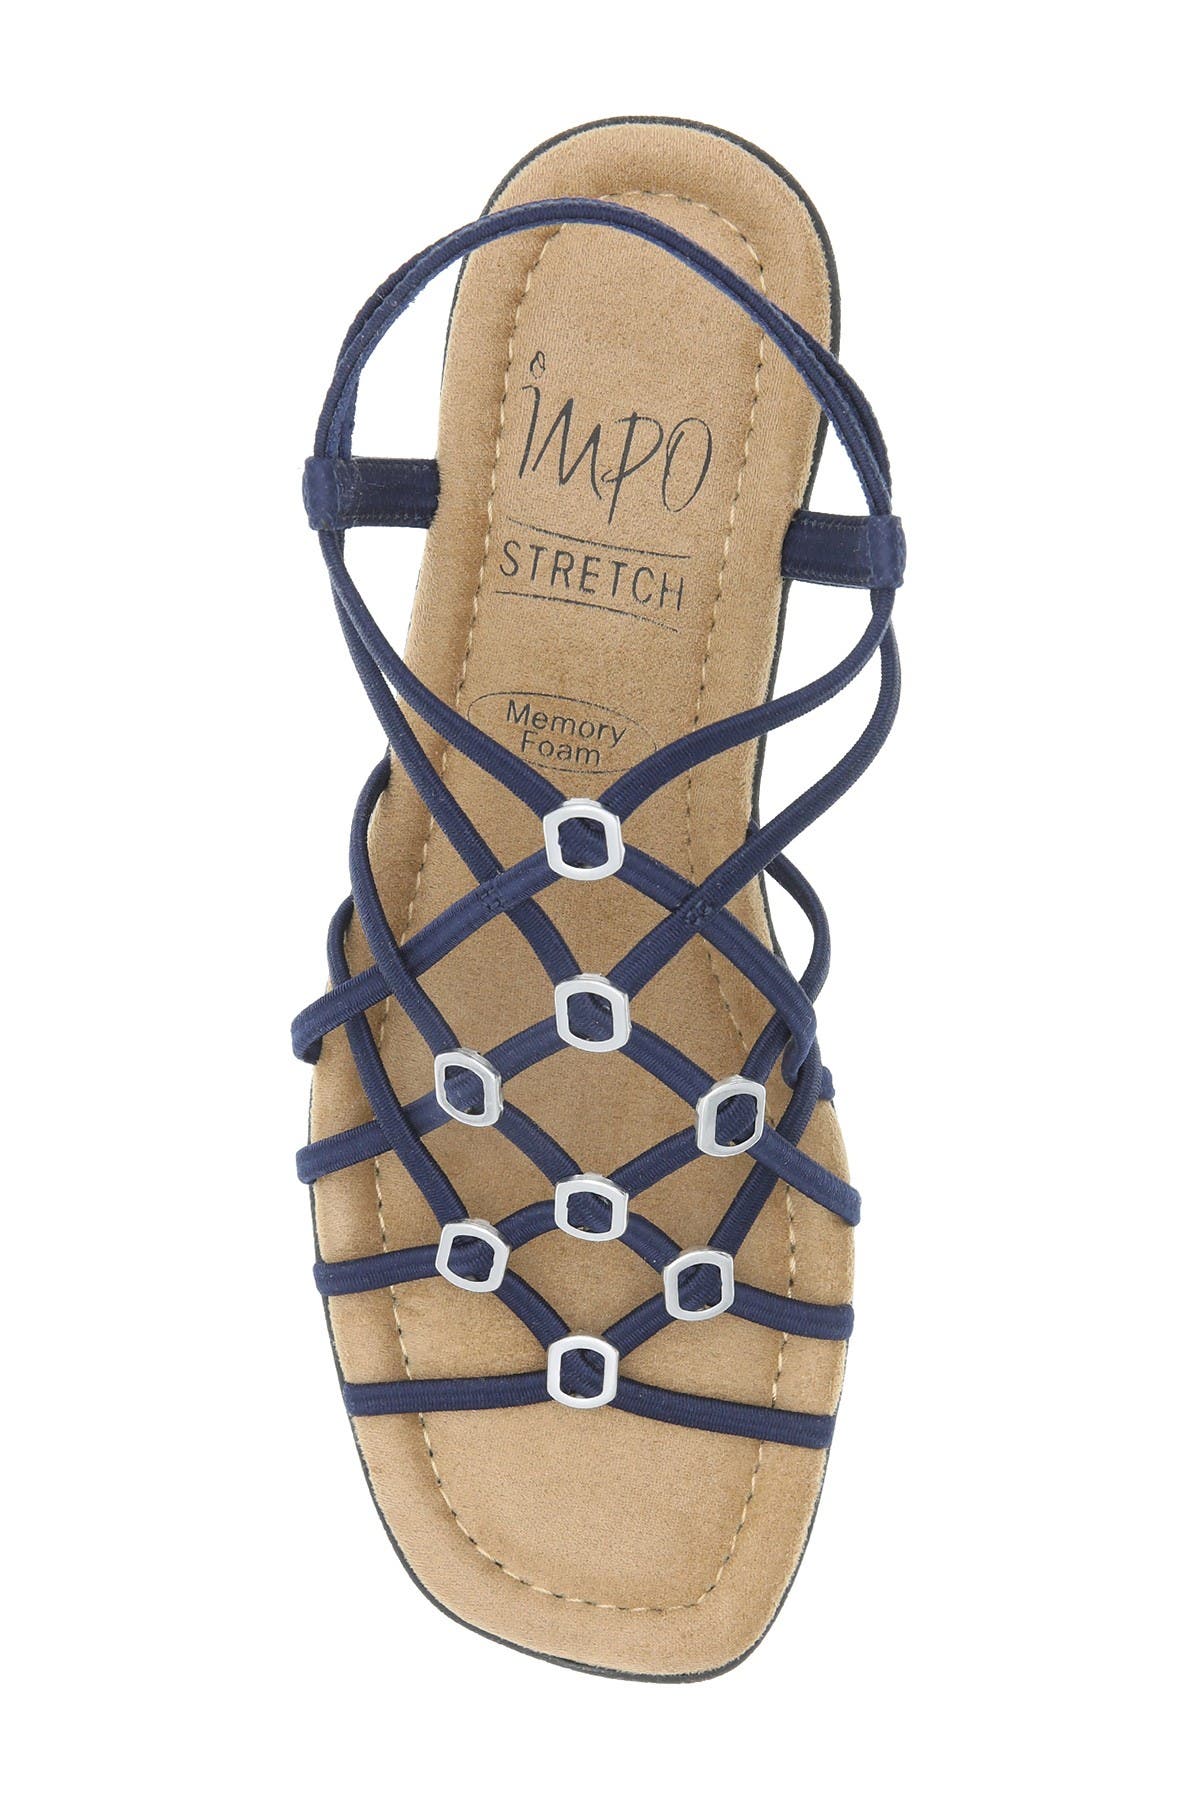 Impo Rowley Stretch Detailed Sandal In Bright Blue4